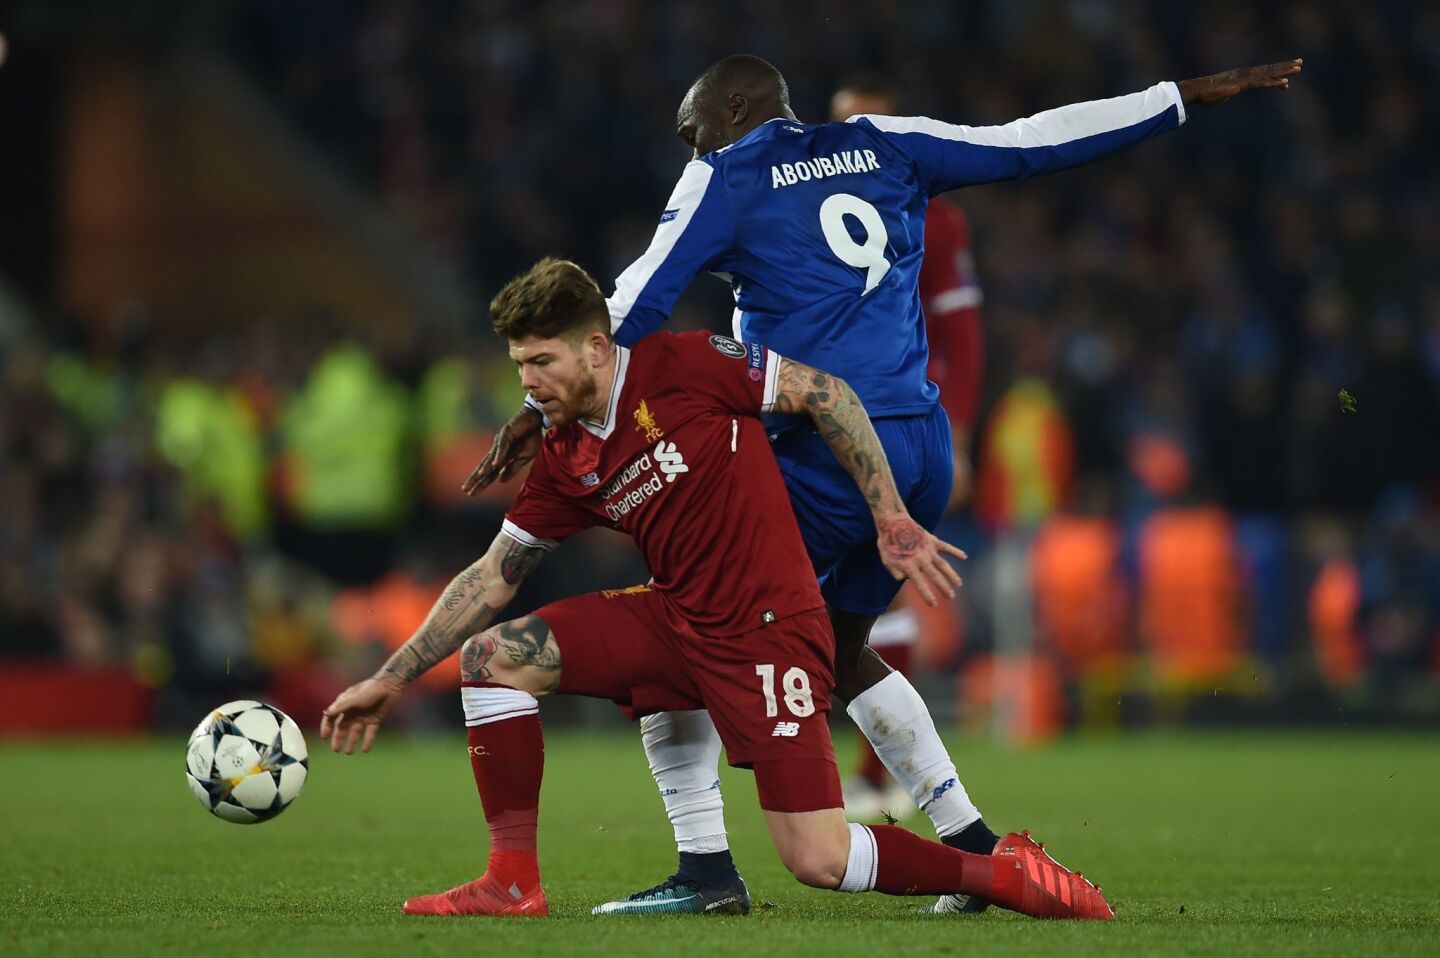 Liverpool's Spanish defender Alberto Moreno (L) vies with Porto's Cameroonian striker Vincent Aboubakar during the UEFA Champions League round of sixteen second leg football match between Liverpool and FC Porto at Anfield in Liverpool, north-west England on March 6, 2018. / AFP PHOTO / PAUL ELLISPAUL ELLIS/AFP/Getty Images ** OUTS - ELSENT, FPG, CM - OUTS * NM, PH, VA if sourced by CT, LA or MoD **